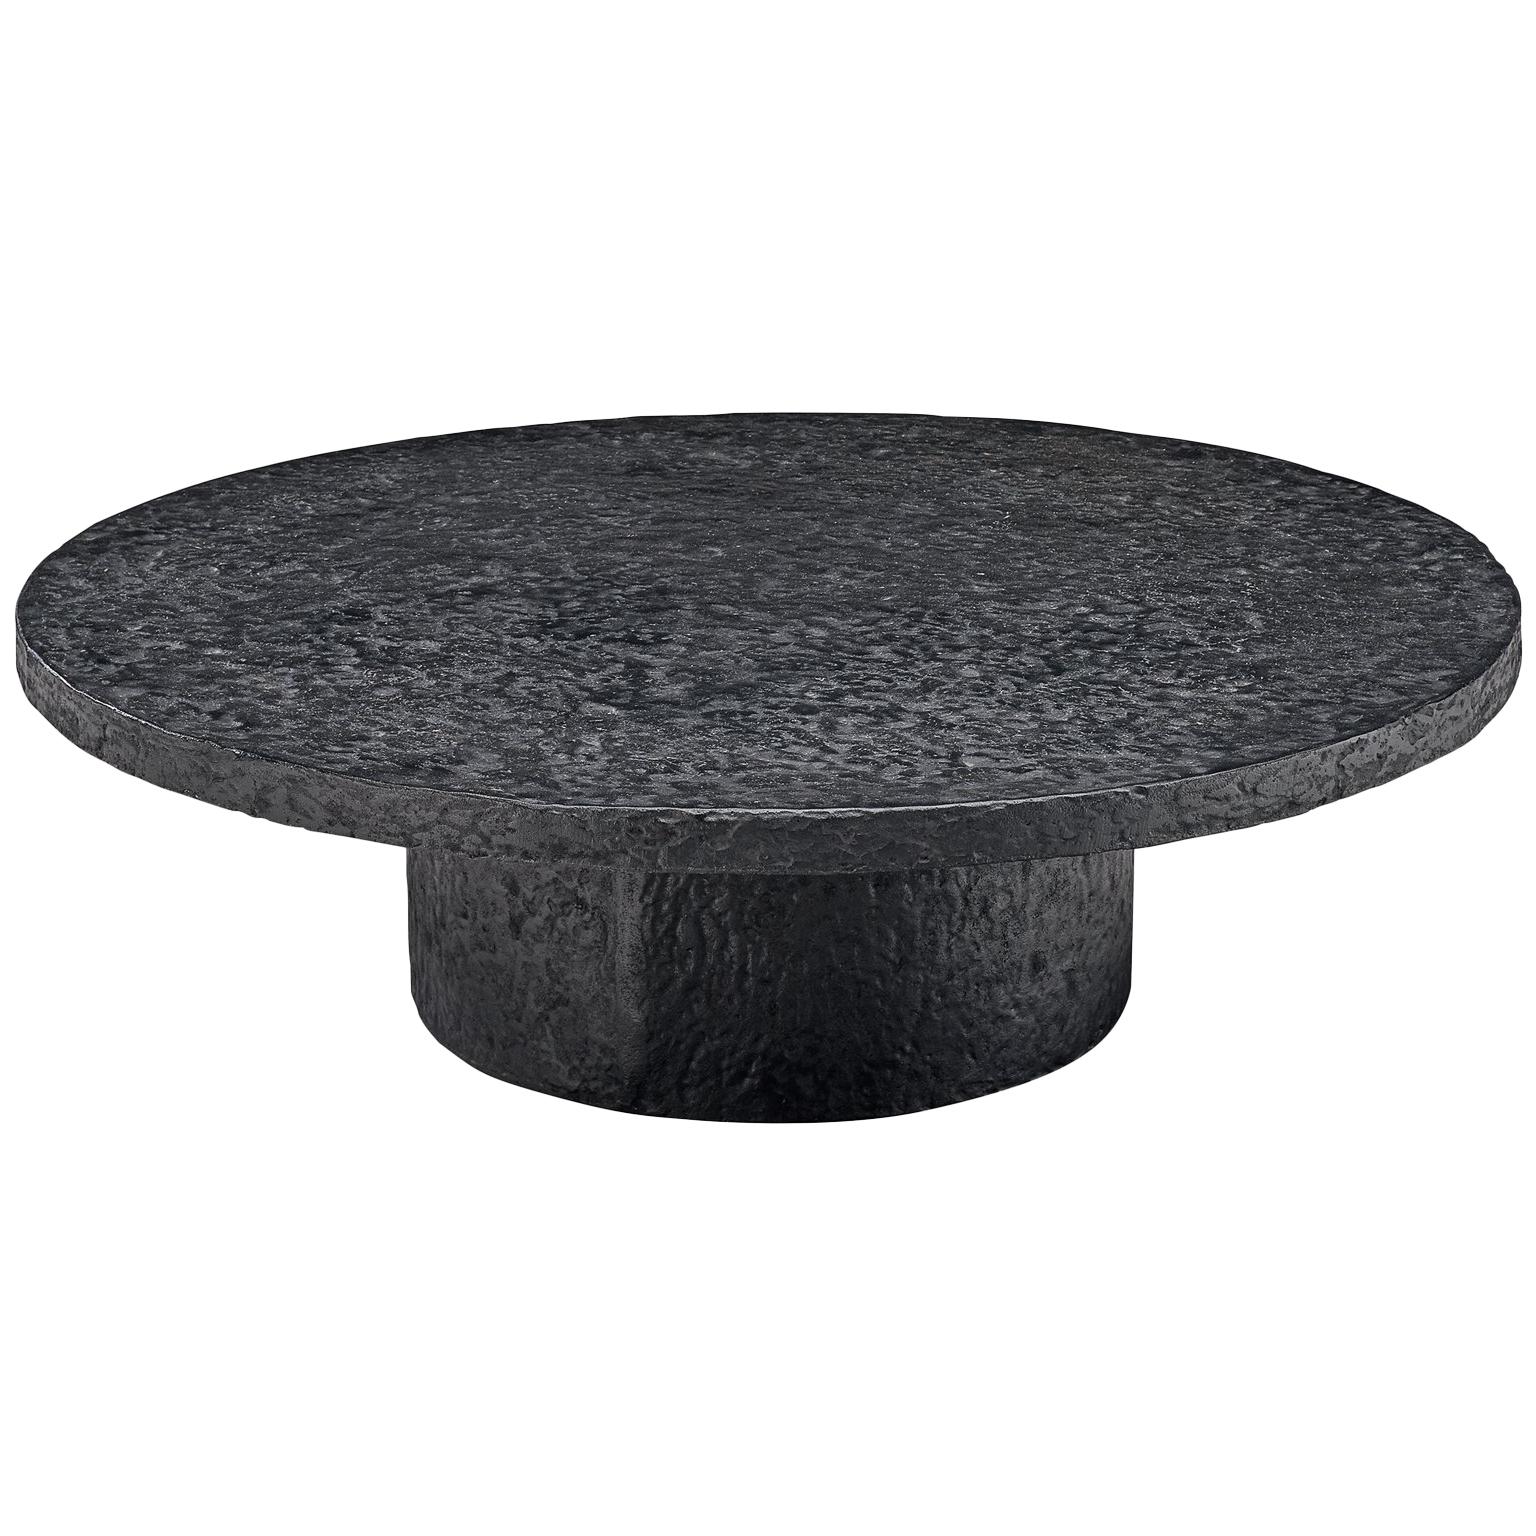 Brutalist Coffee Table with Stone Look